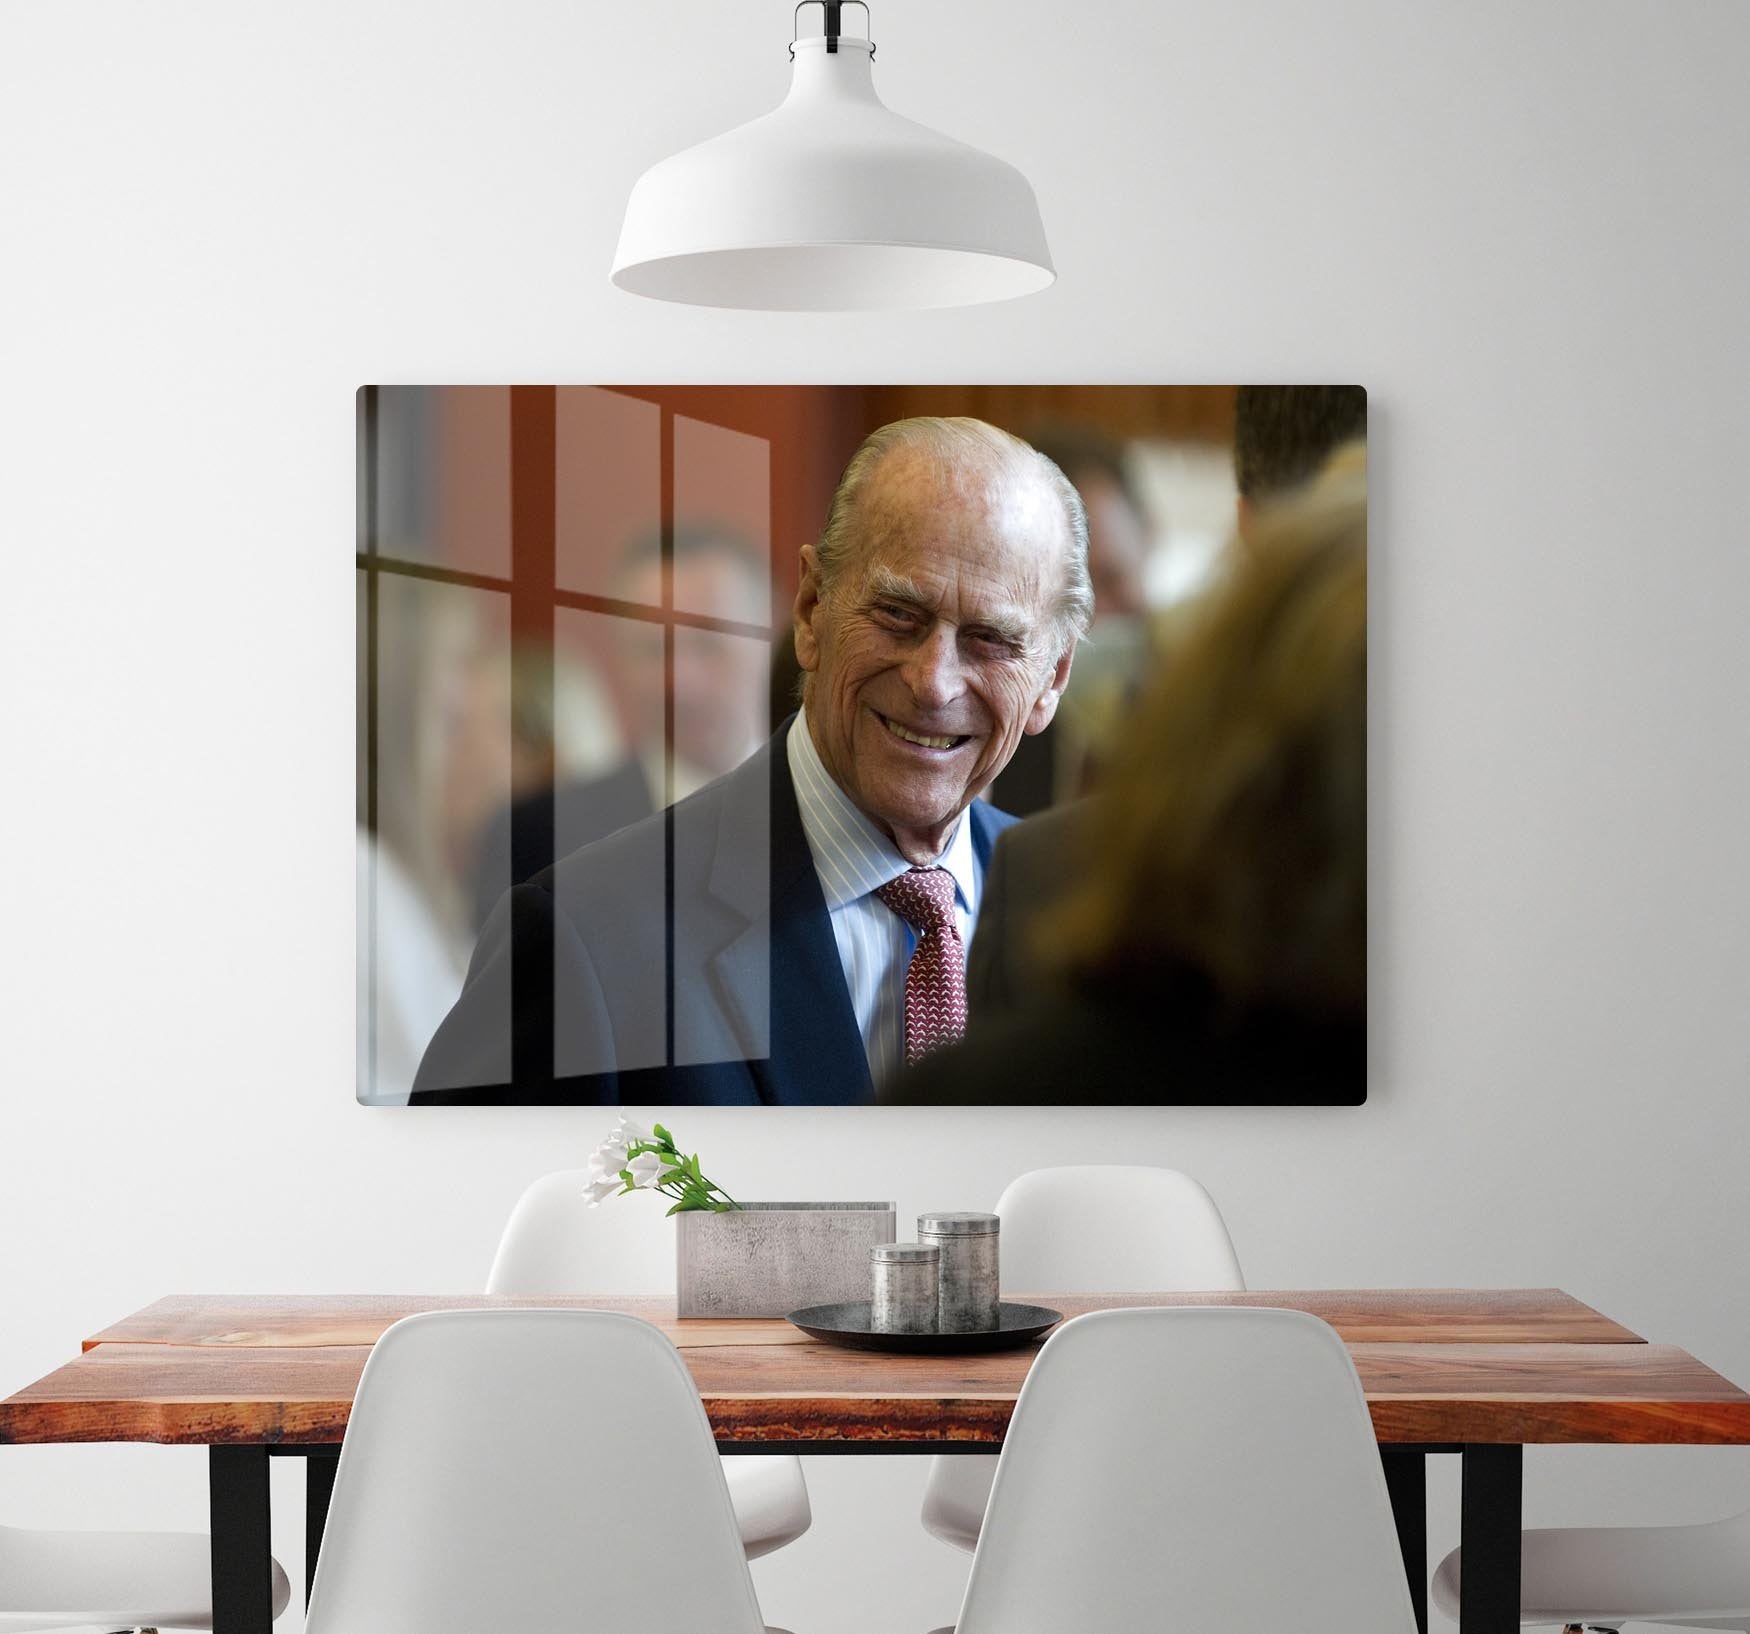 Prince Philip at the Journalists Charity at Stationers Hall HD Metal Print